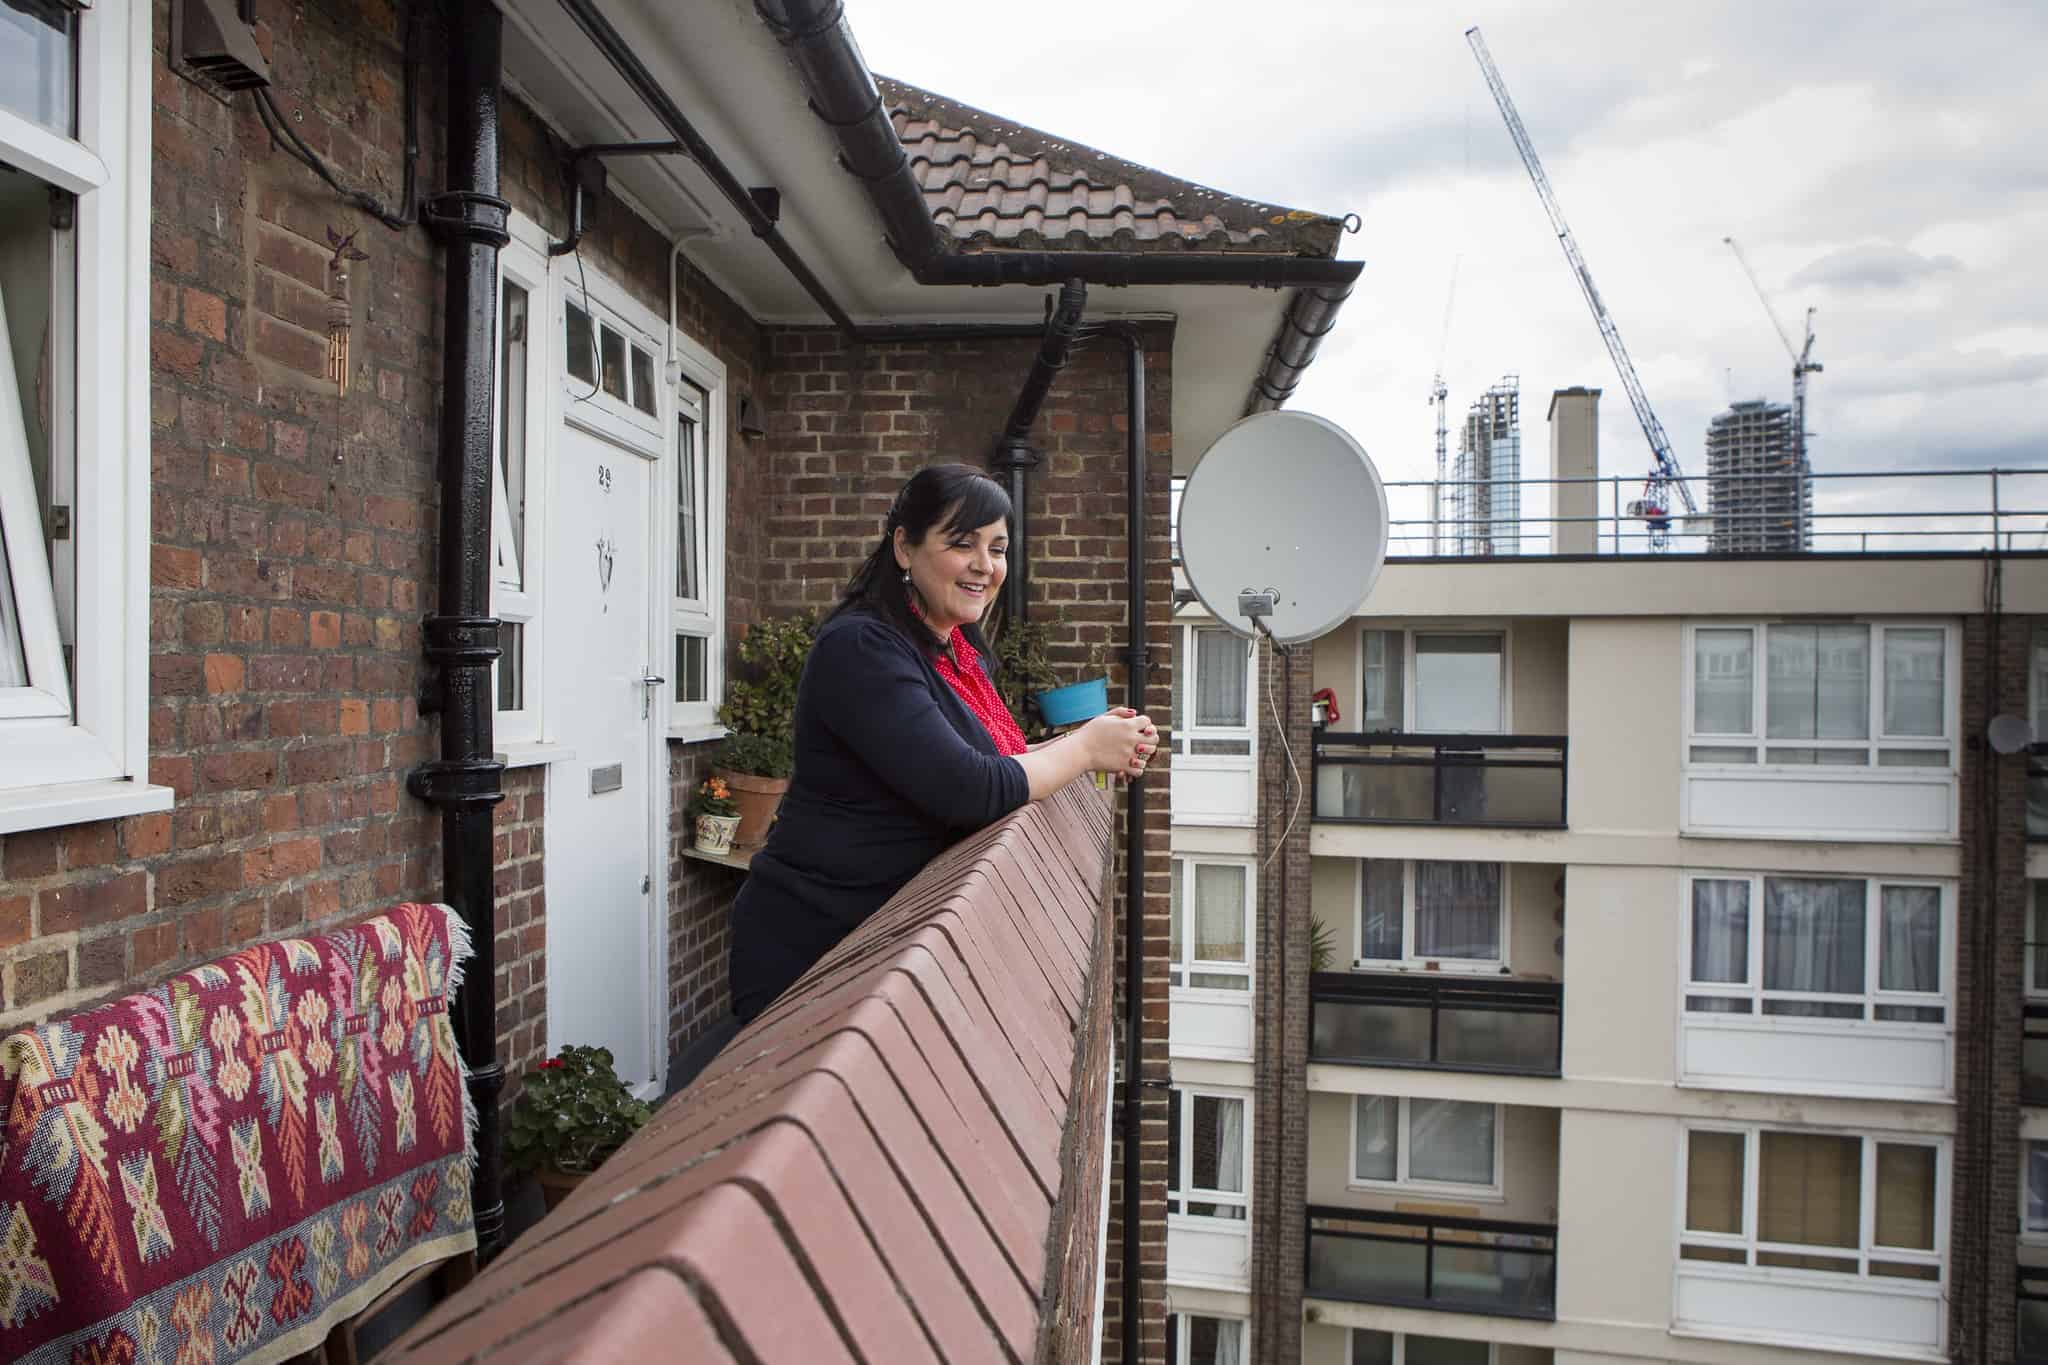 A woman standing on a balcony on a council estate looking at the camera